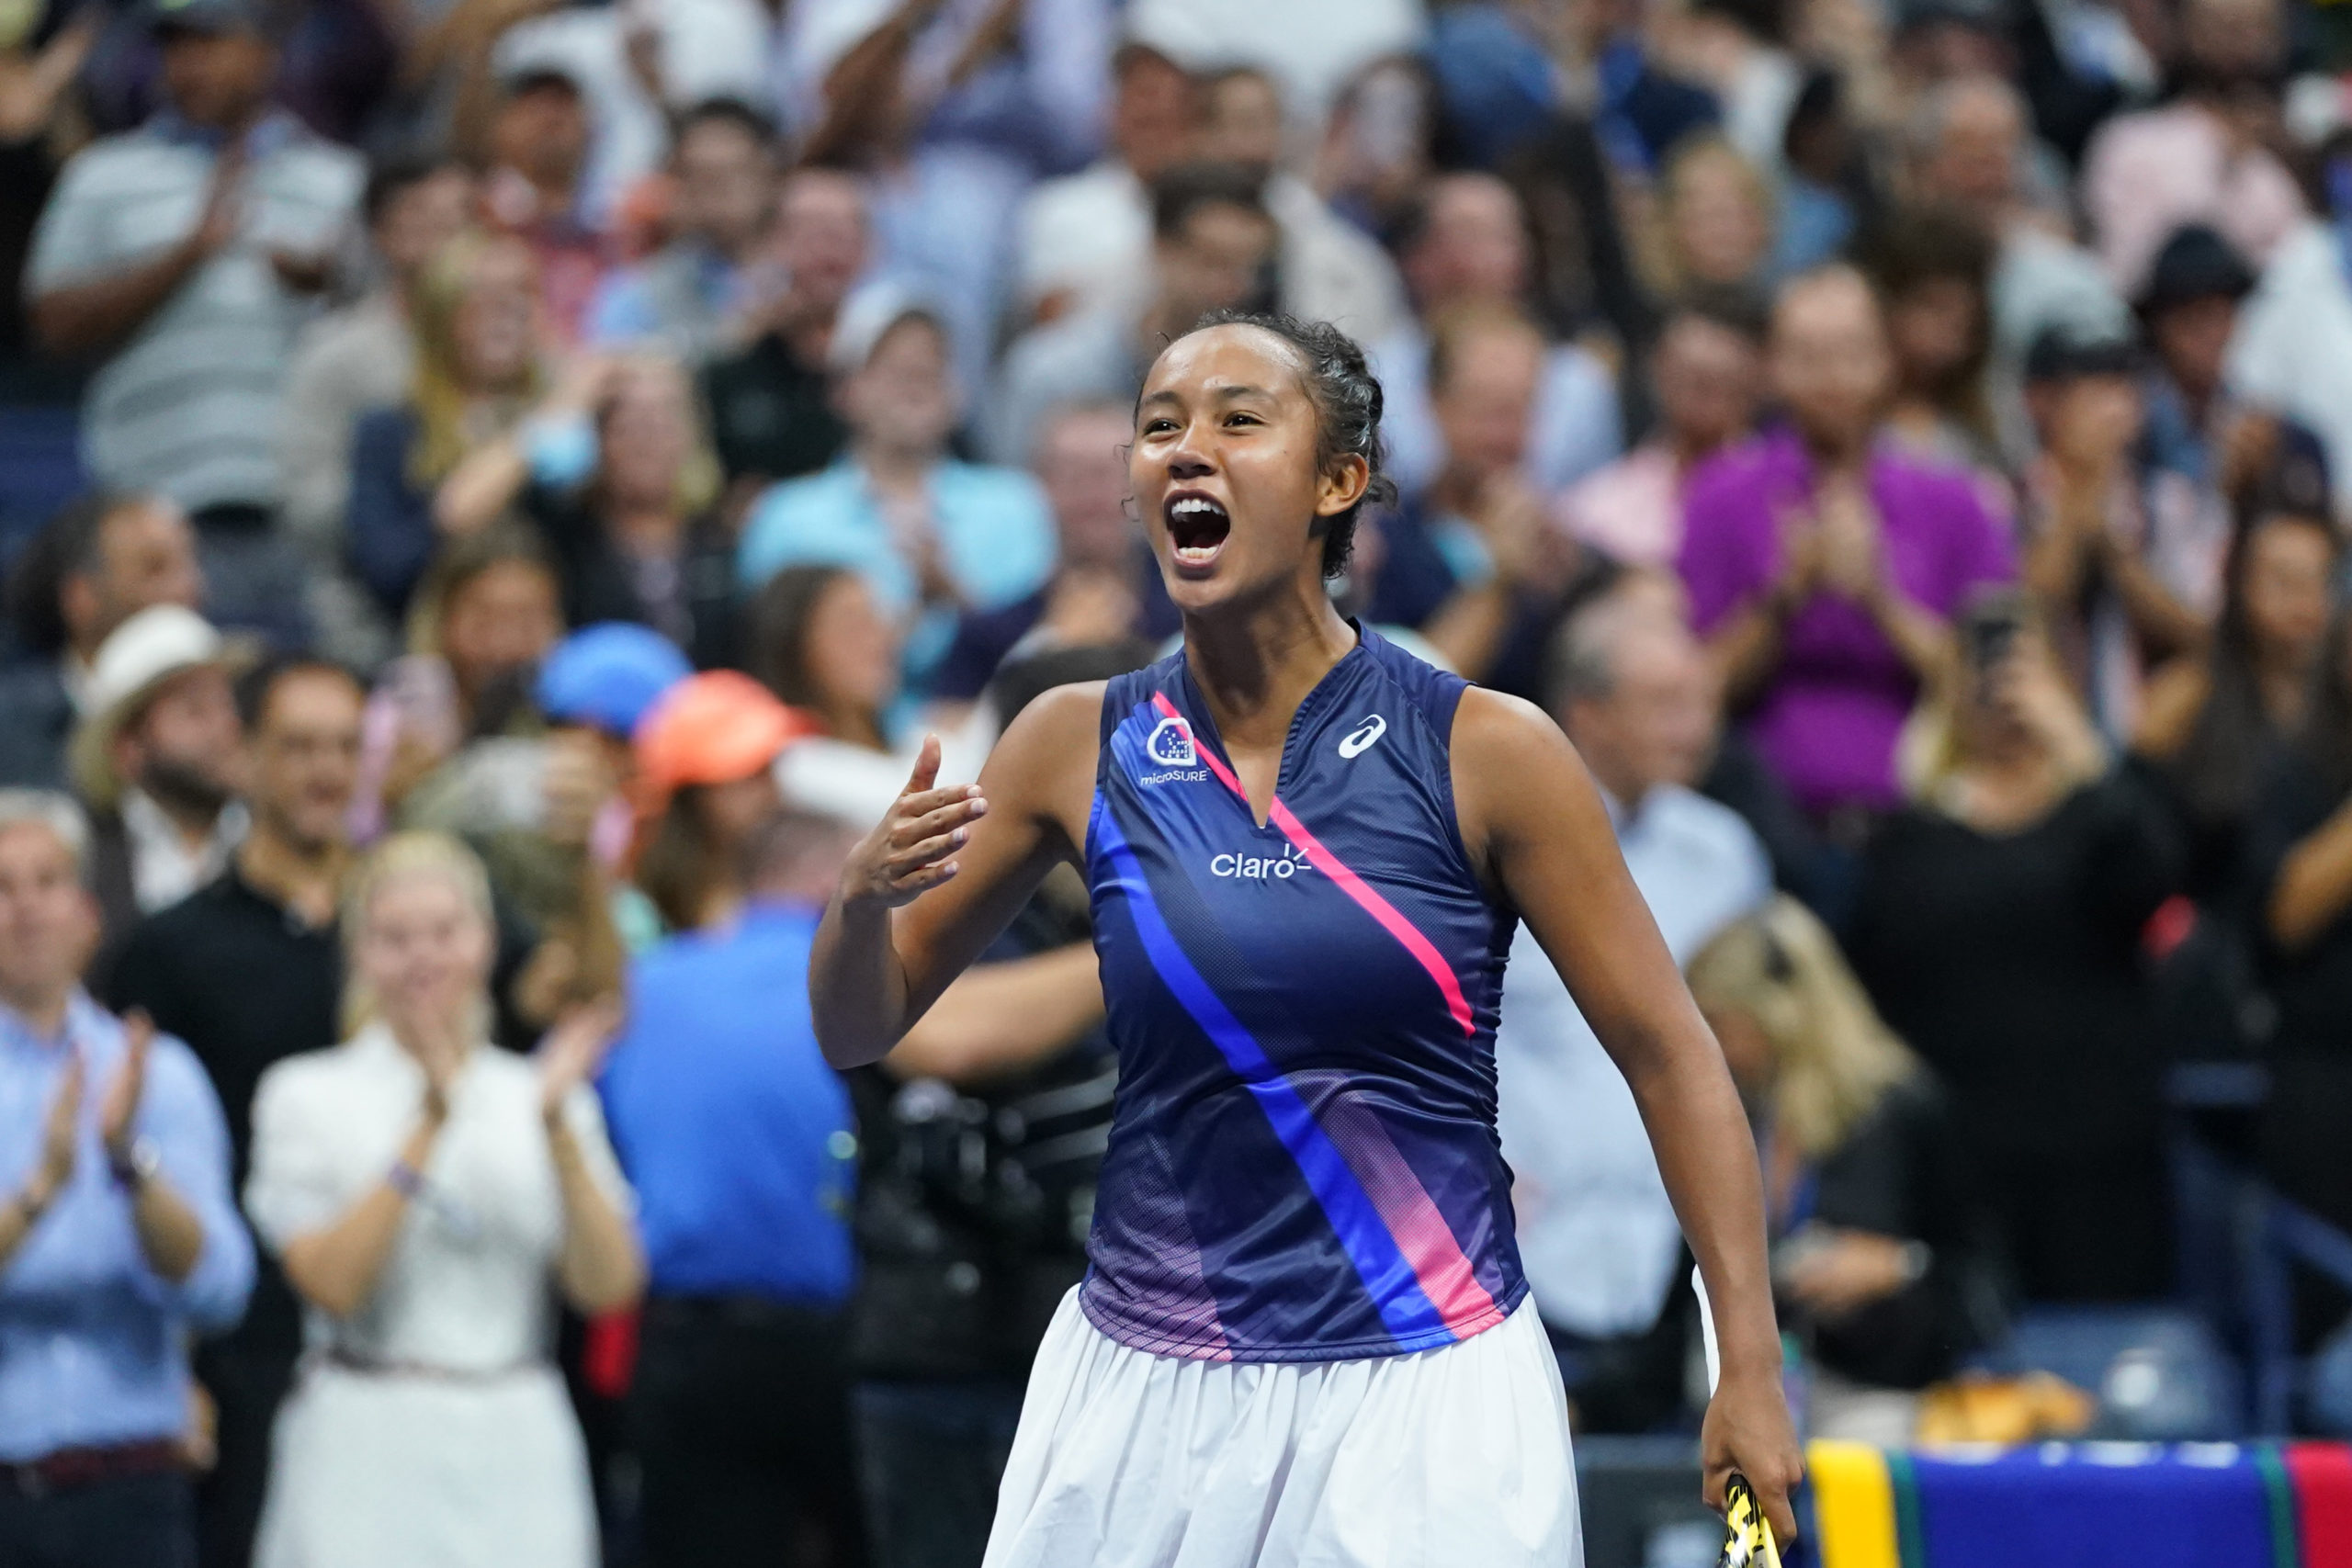 Leylah Fernandez of Canada celebrates after her match against Aryna Sabalenka of Belarus (not pictured) on day eleven of the 2021 U.S. Open tennis tournament at USTA Billie Jean King National Tennis Center.